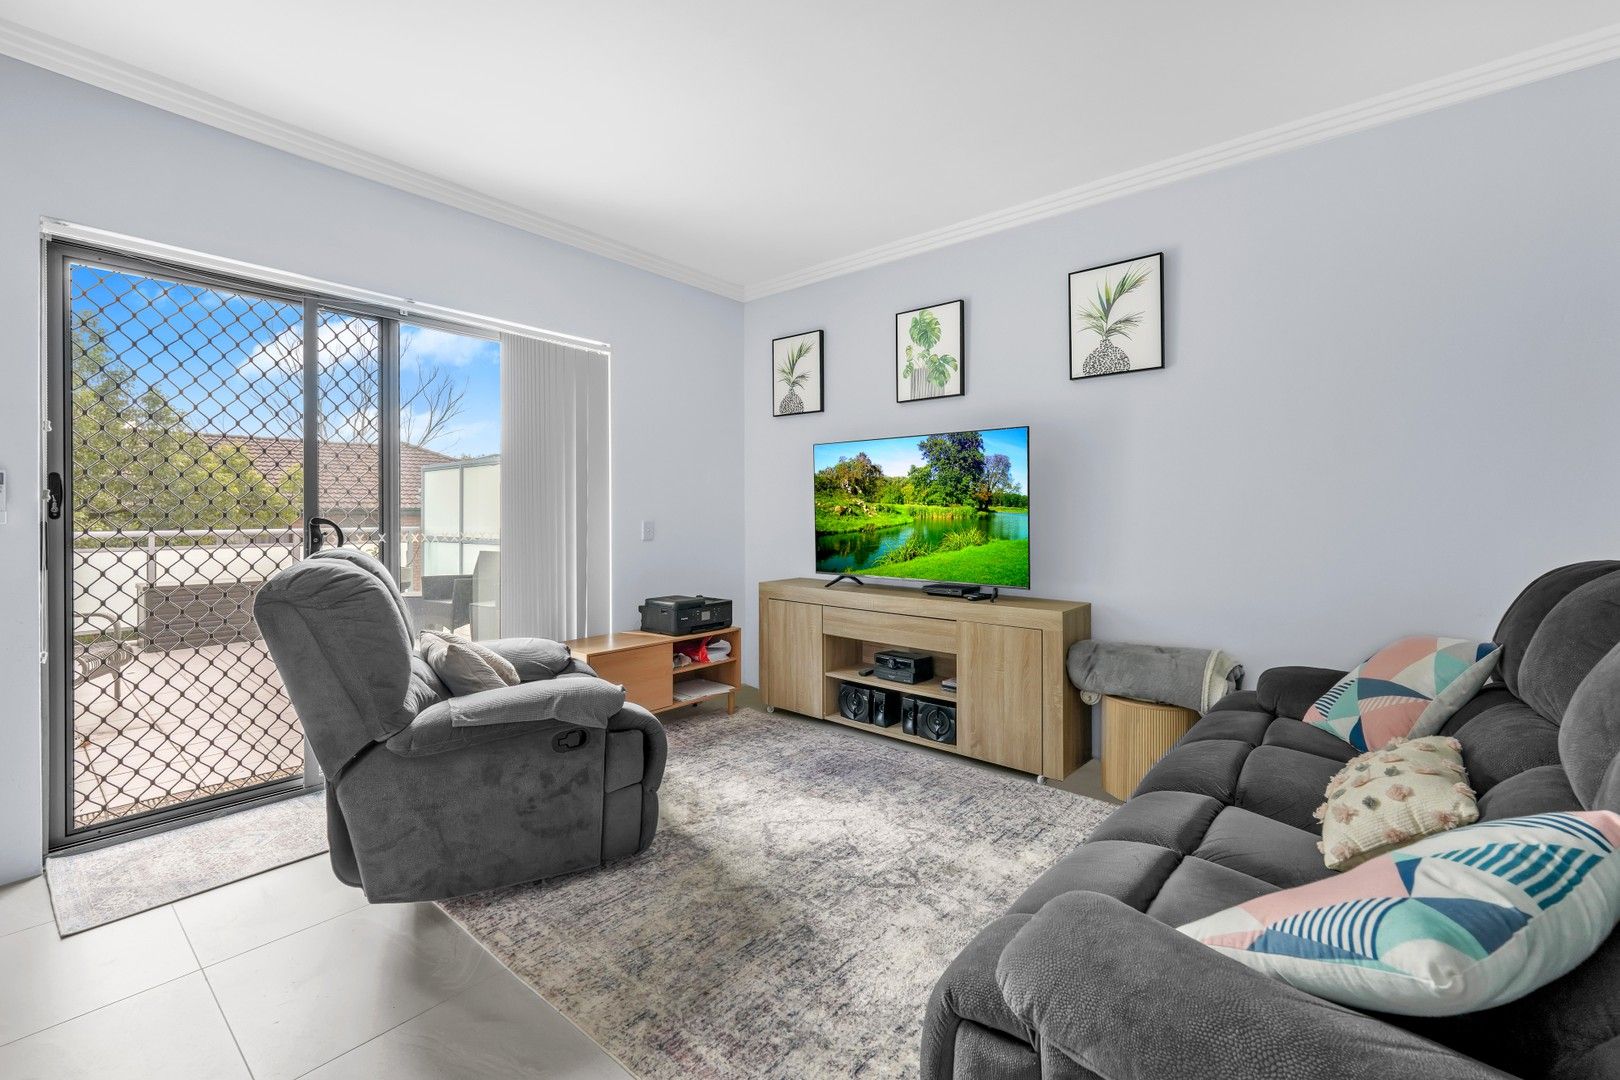 2 bedrooms House in 10/26-32 Princess Mary Street ST MARYS NSW, 2760